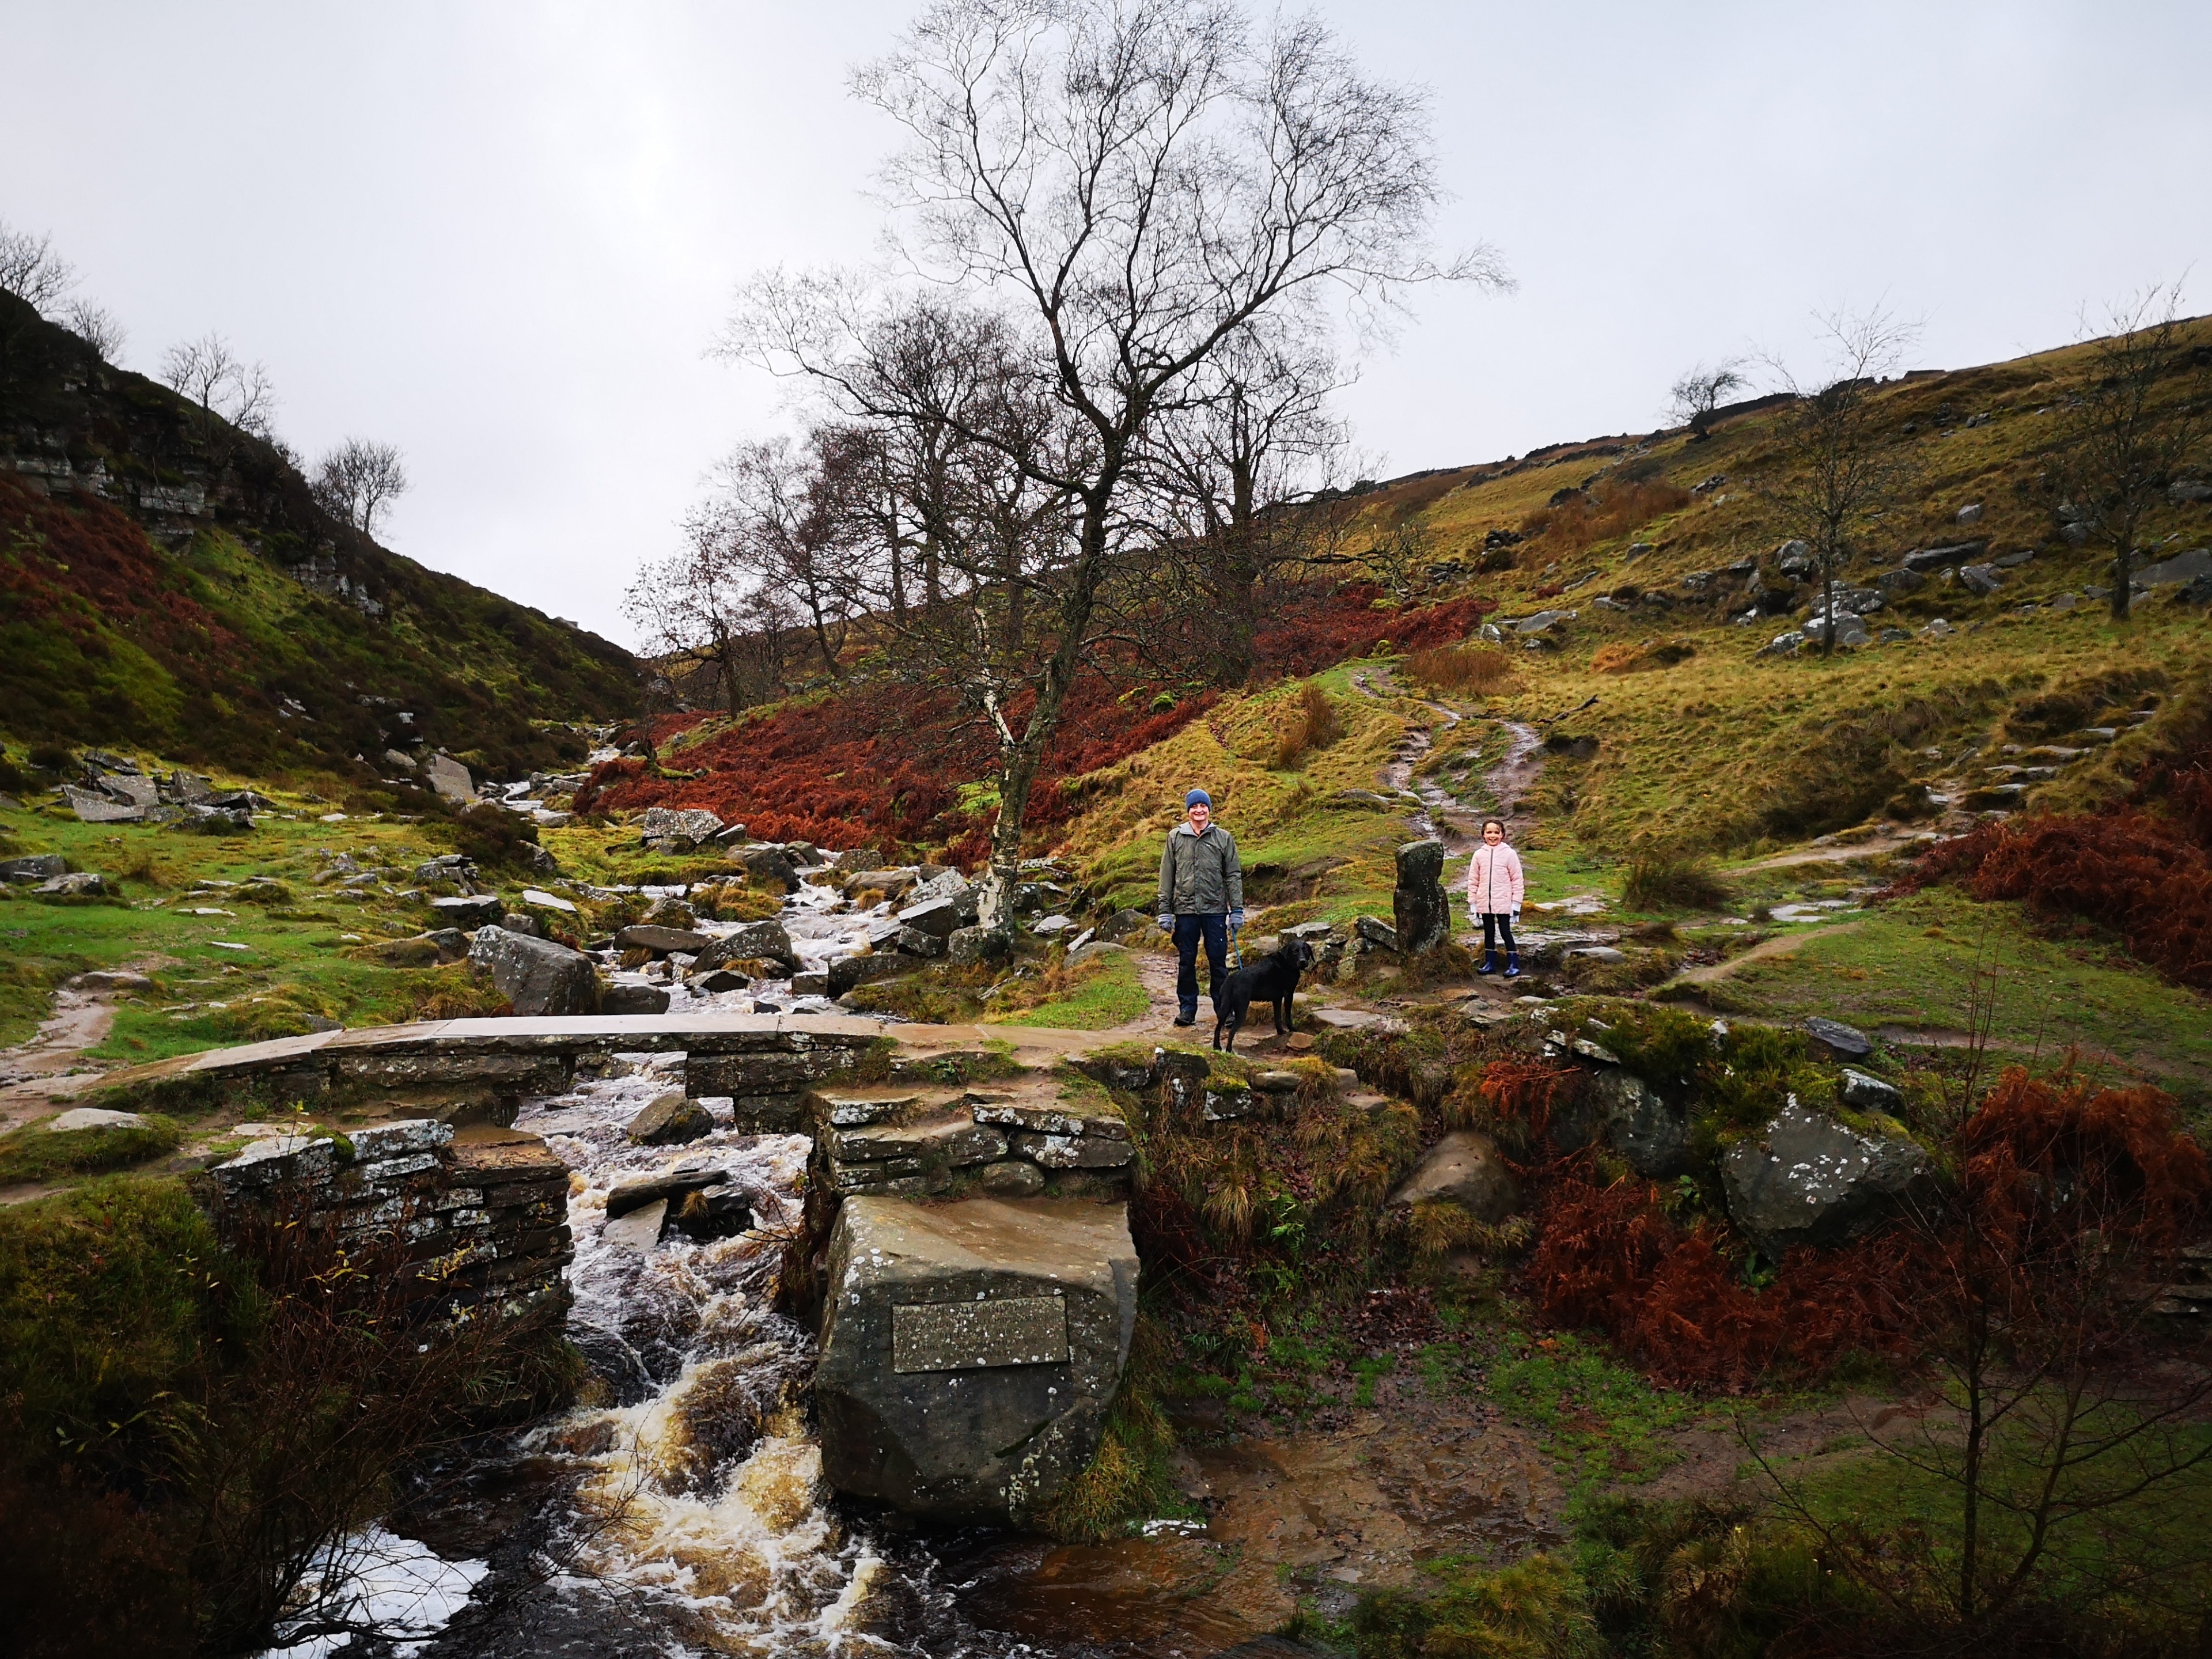 The packhorse bridge near the Bronte Falls , Haworth, Yorkshire. Resplendent scenery even on a wuthering day in December. :)